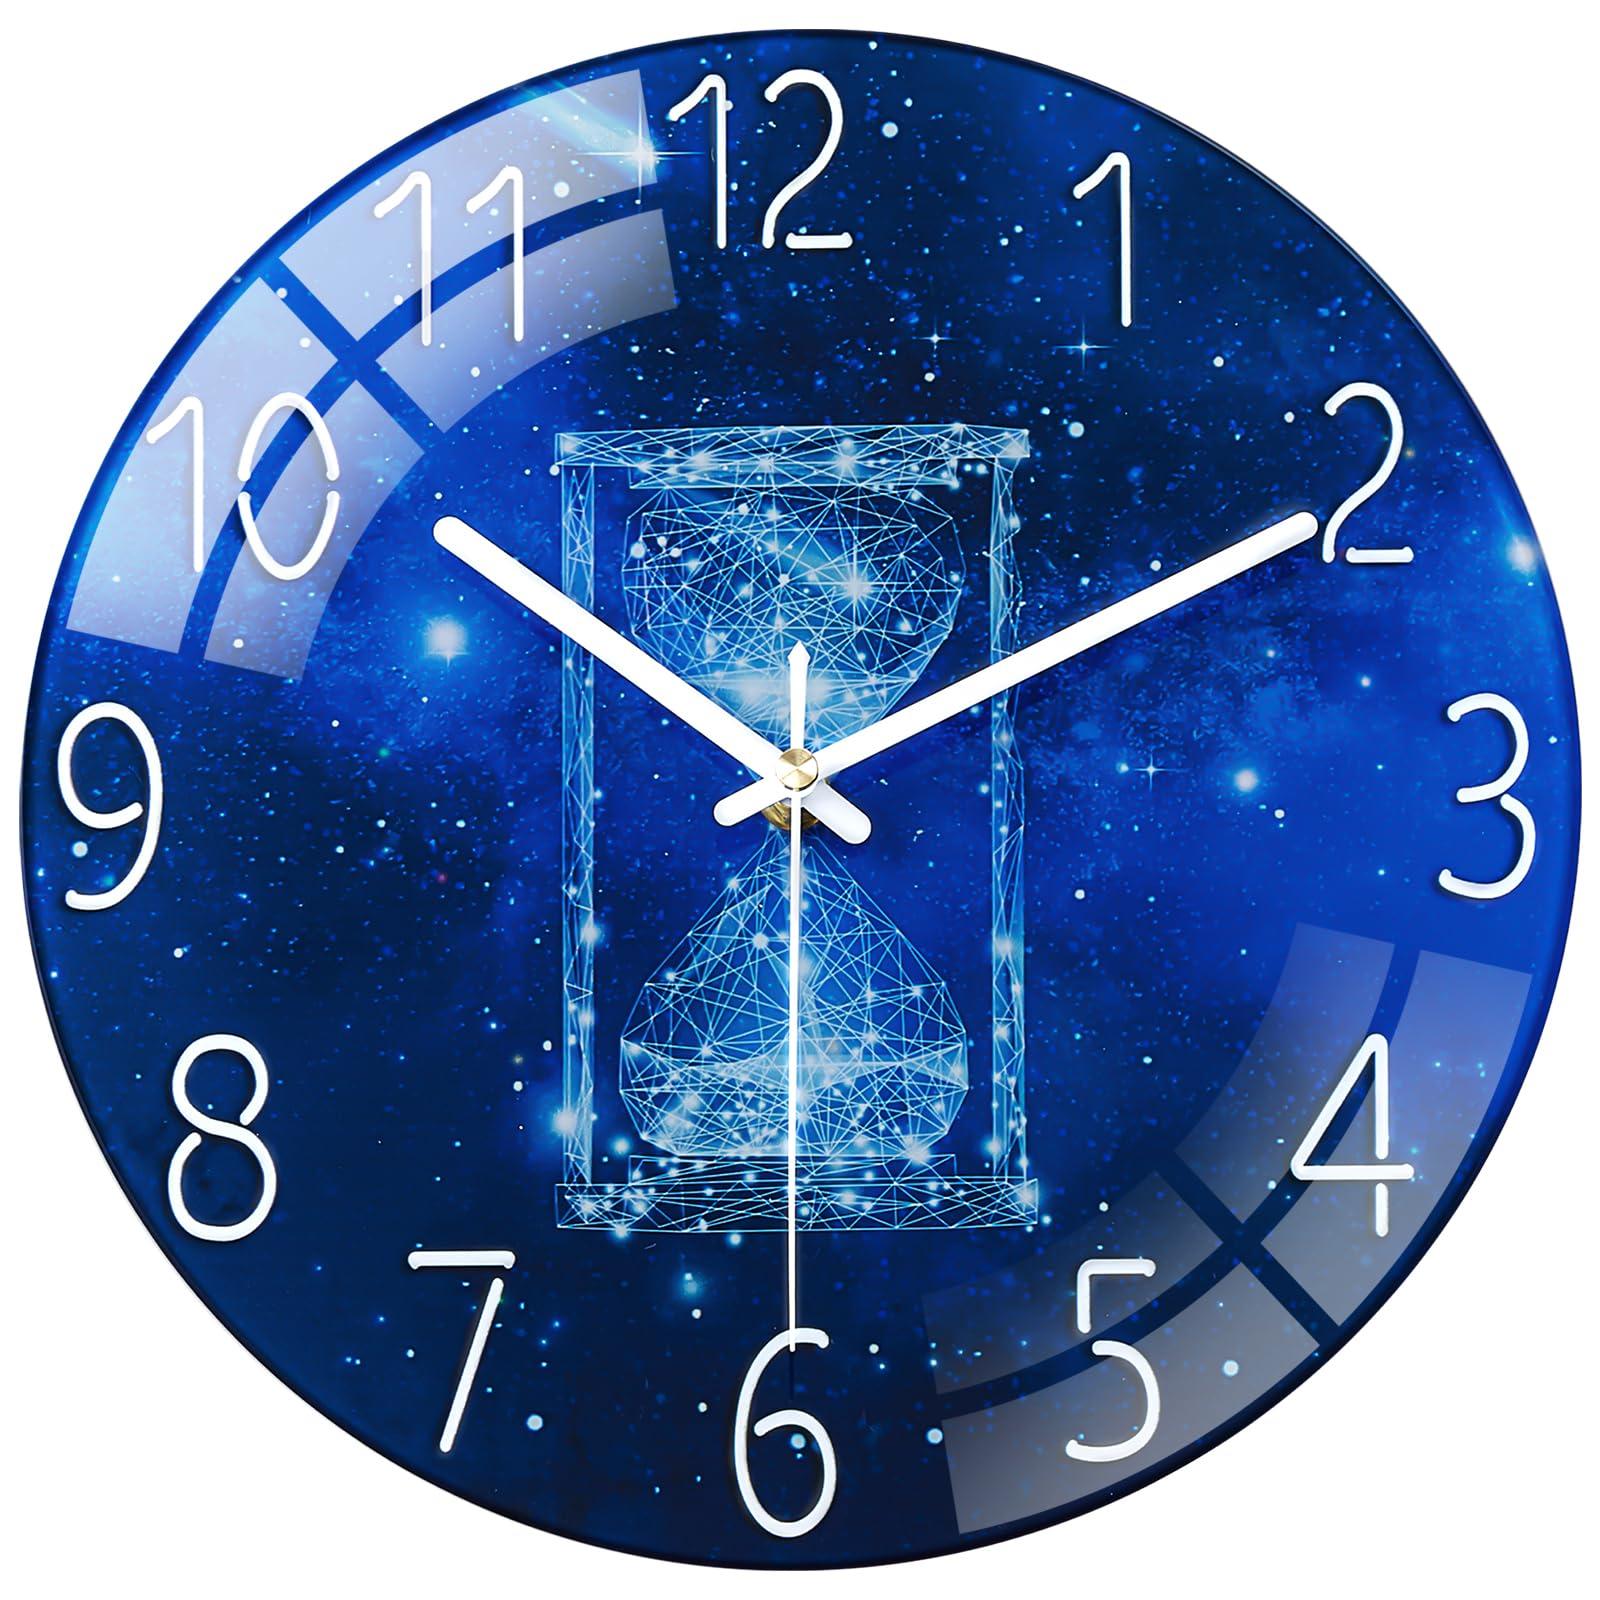 Warmiehomy Modern Glass Wall Clock 12 Inch Kitchen Wall Clocks Time Hourglass Pattern Decorative Wall Clocks for Living Room Battery Operated Silent Small Frameless Wall Clock for Bedroom Home Decor